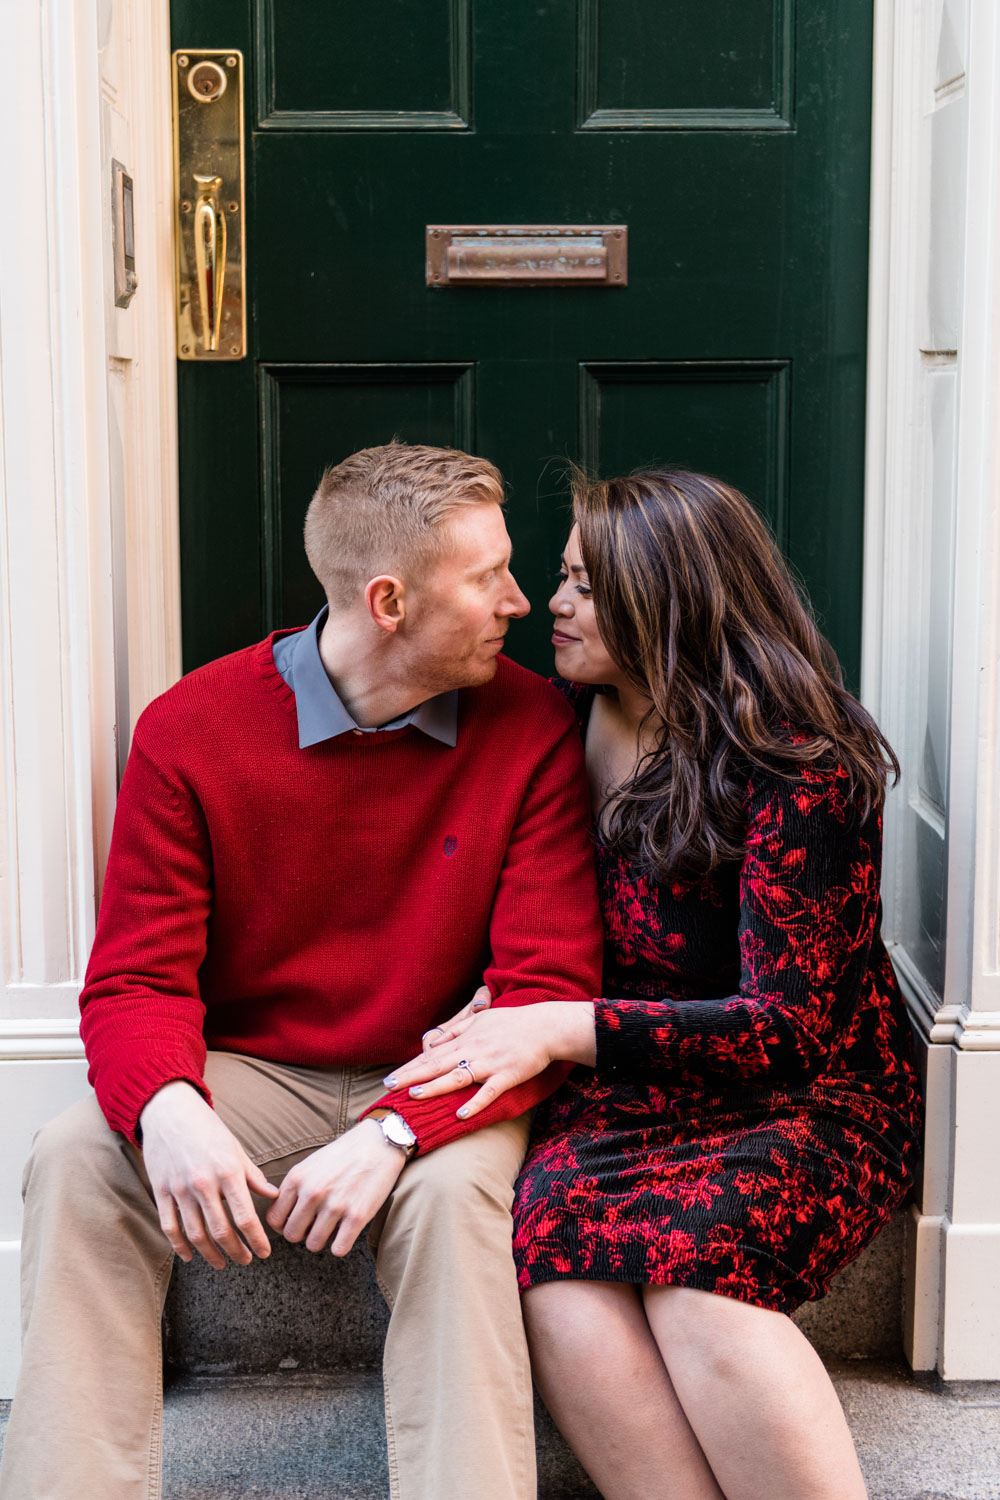 Andrea + Scott | Dog Lovers Beacon Hill Formal Spring Sunrise Creative Organic Romantic Engagement Session | Boston and New England Engagement Photography | Lorna Stell Photo